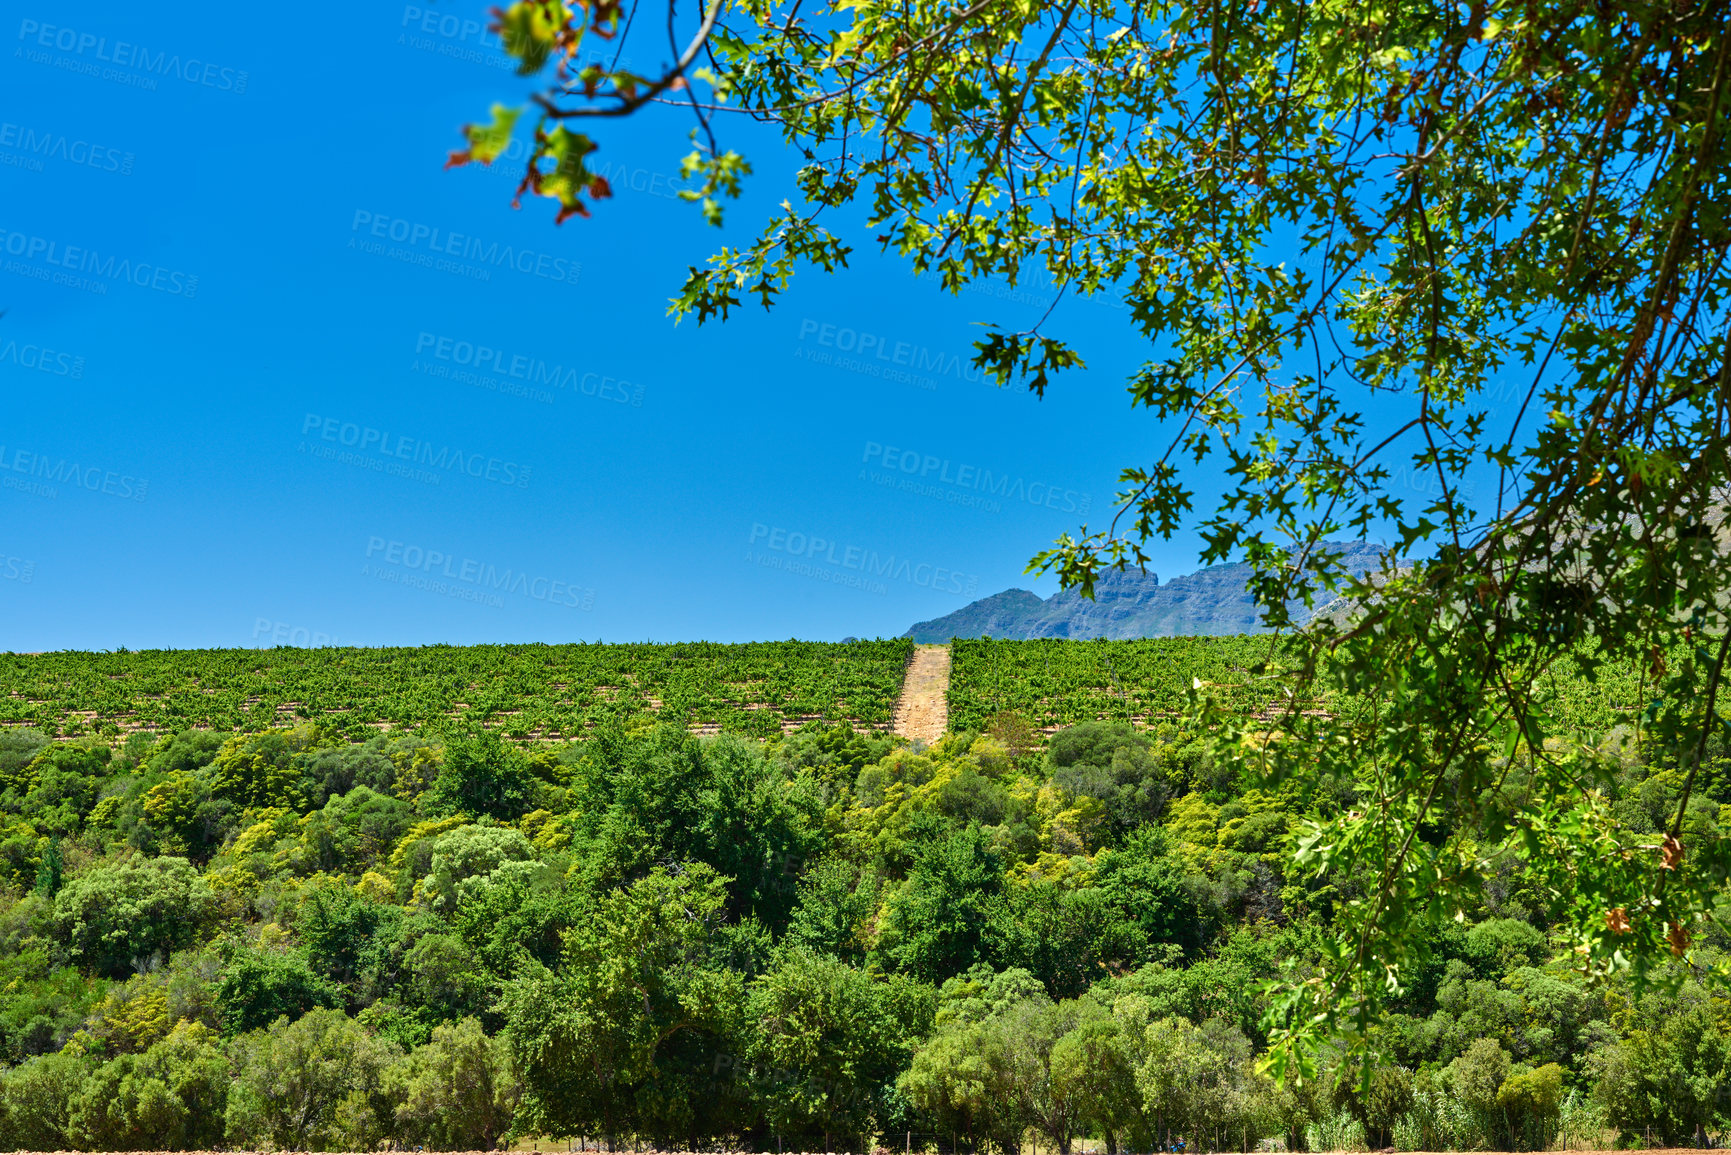 Buy stock photo Green landscape of a vineyard with open blue sky in a wine growing area. Lots of bushes or plantations on a wine farm with mountain outlines in the background in Stellenbosch, South Africa